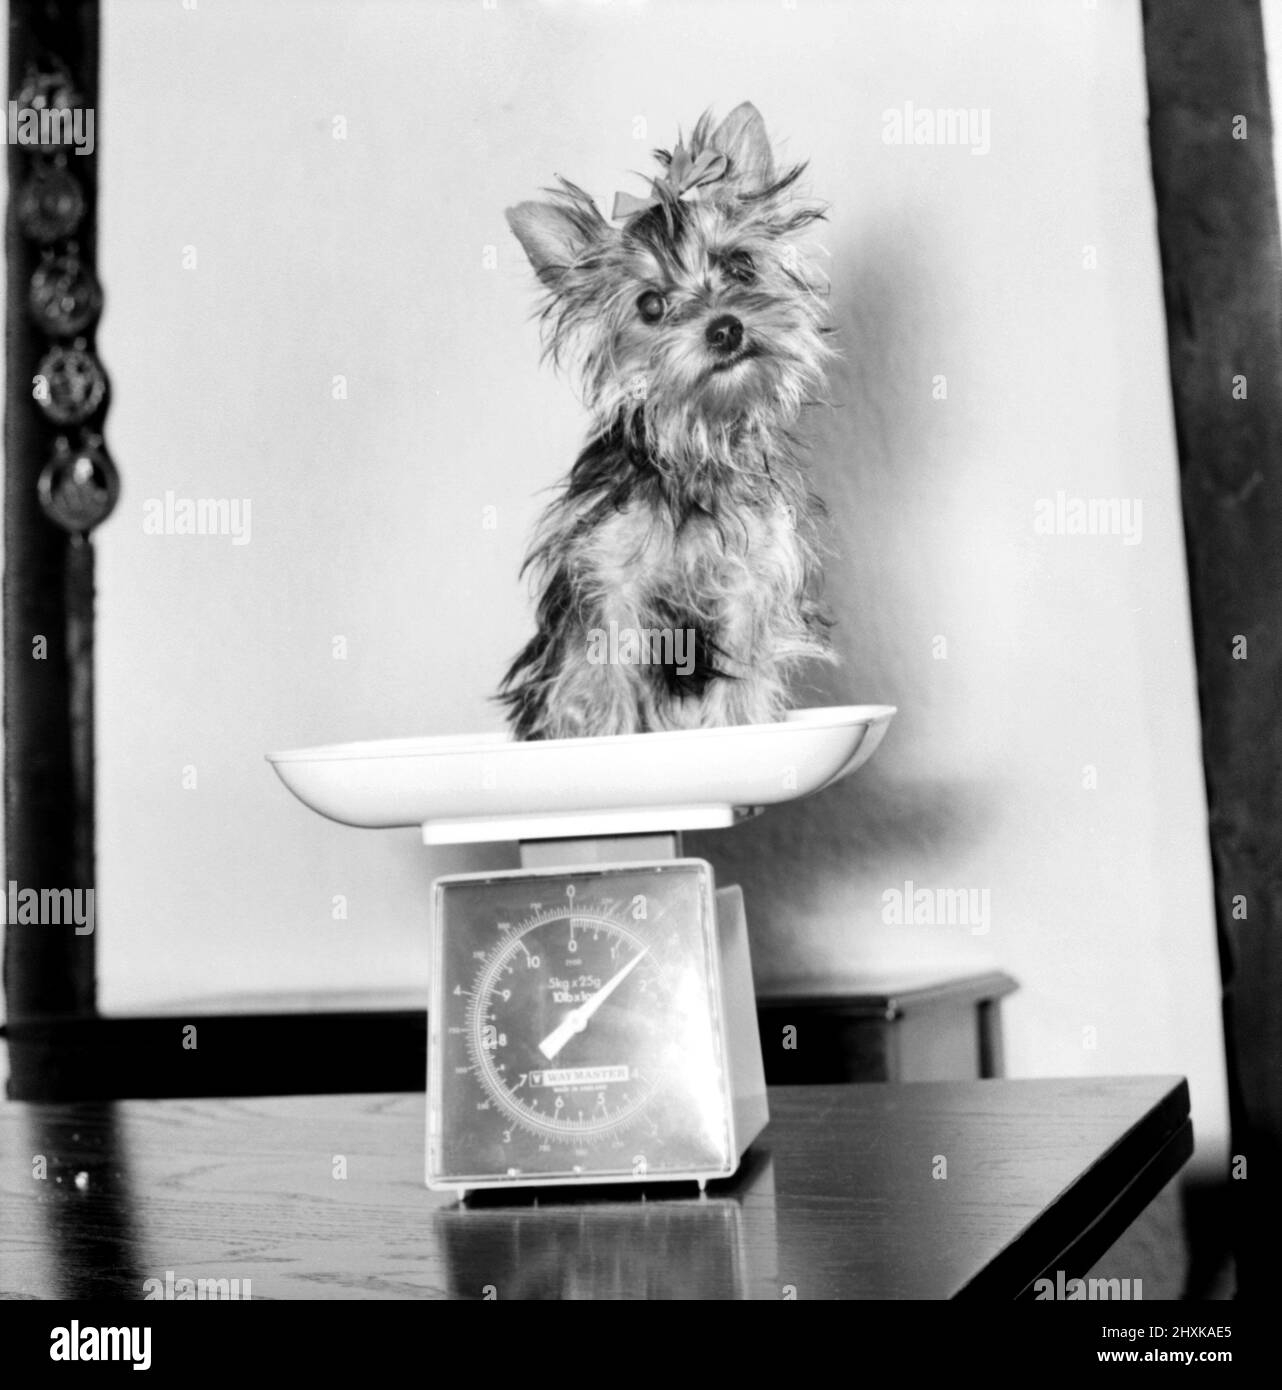 Fifi here is smaller than the average Yorkshire Terrier. Seen here sitting on a set of kitchen scales and weighing in at only 24 oz. April 1977 77-02090-001 Stock Photo